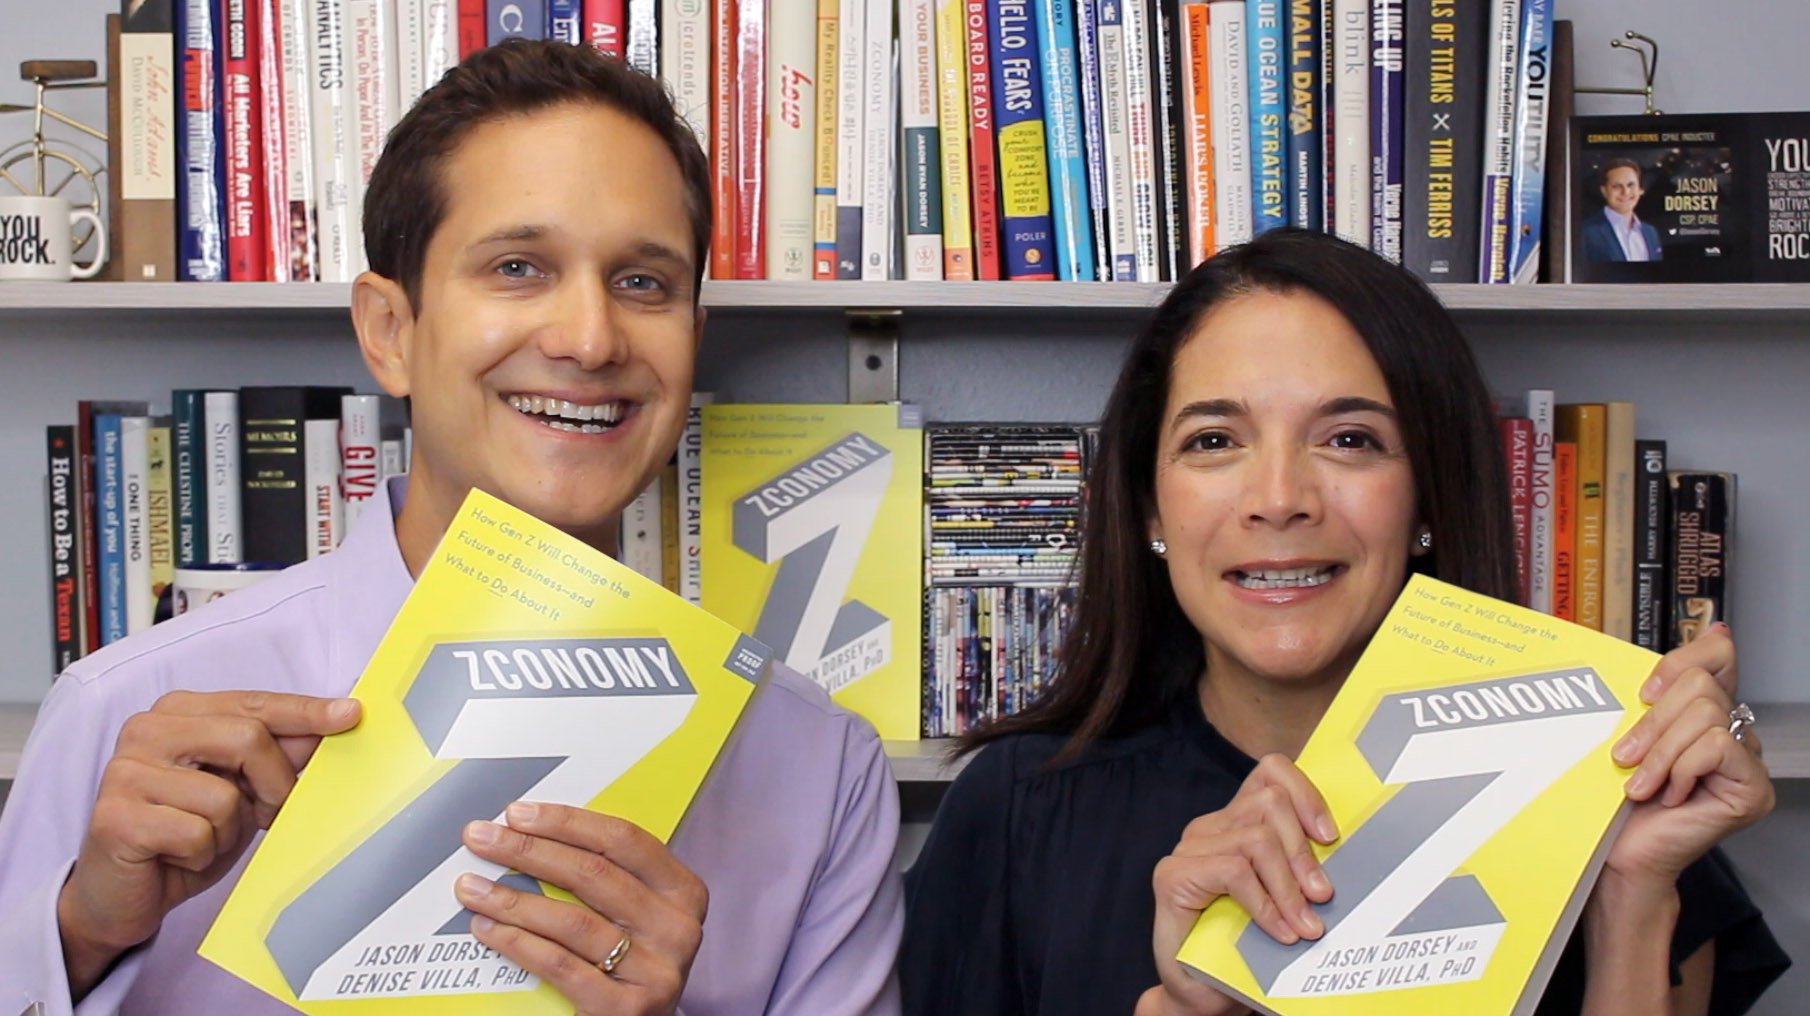 Authors Jason Dorsey and Denise Villa, PhD, holding copies of their book Zconomy and smiling